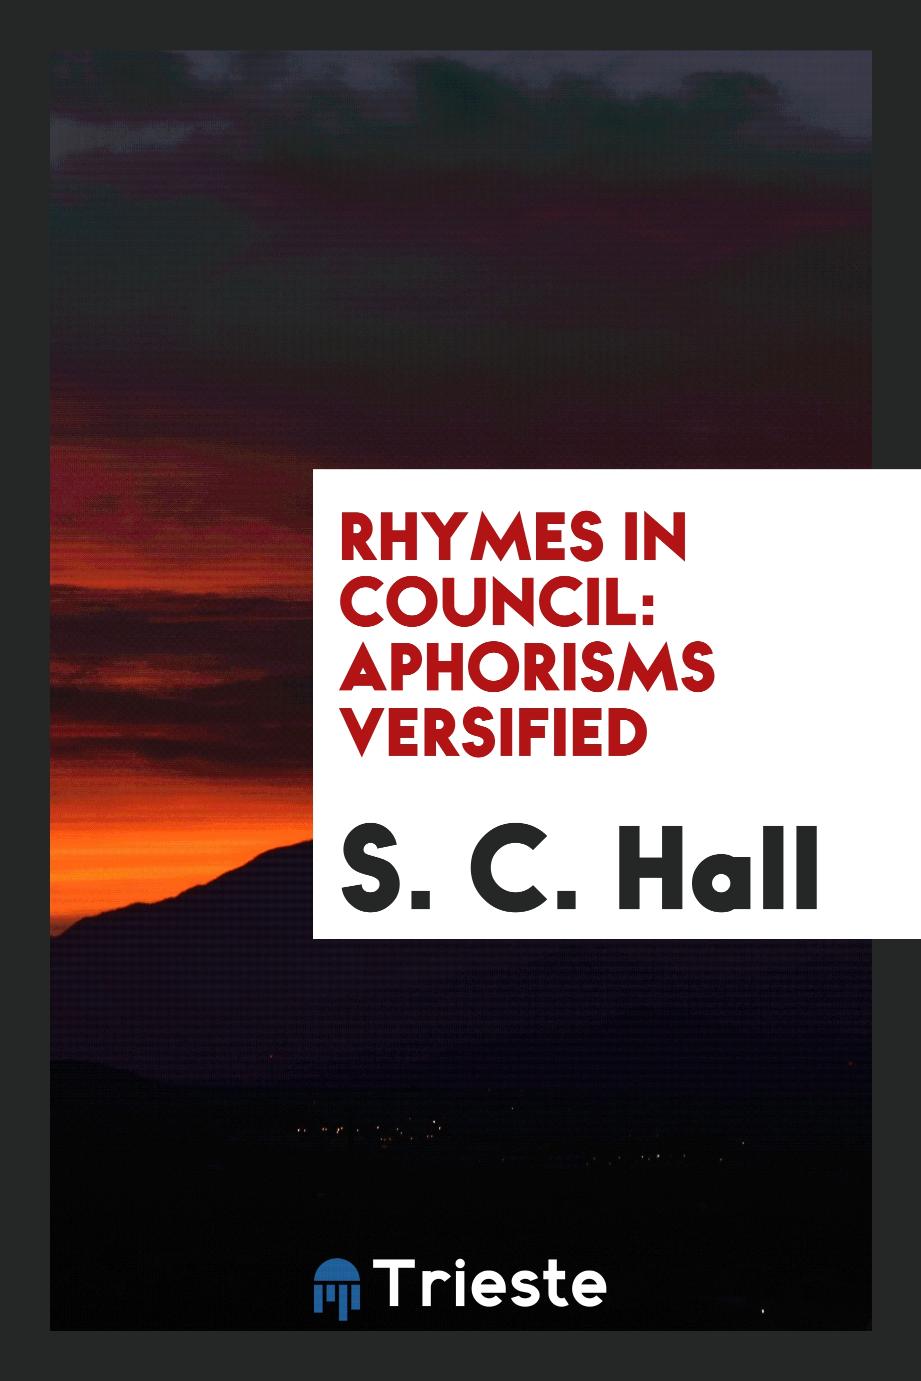 Rhymes in Council: Aphorisms Versified